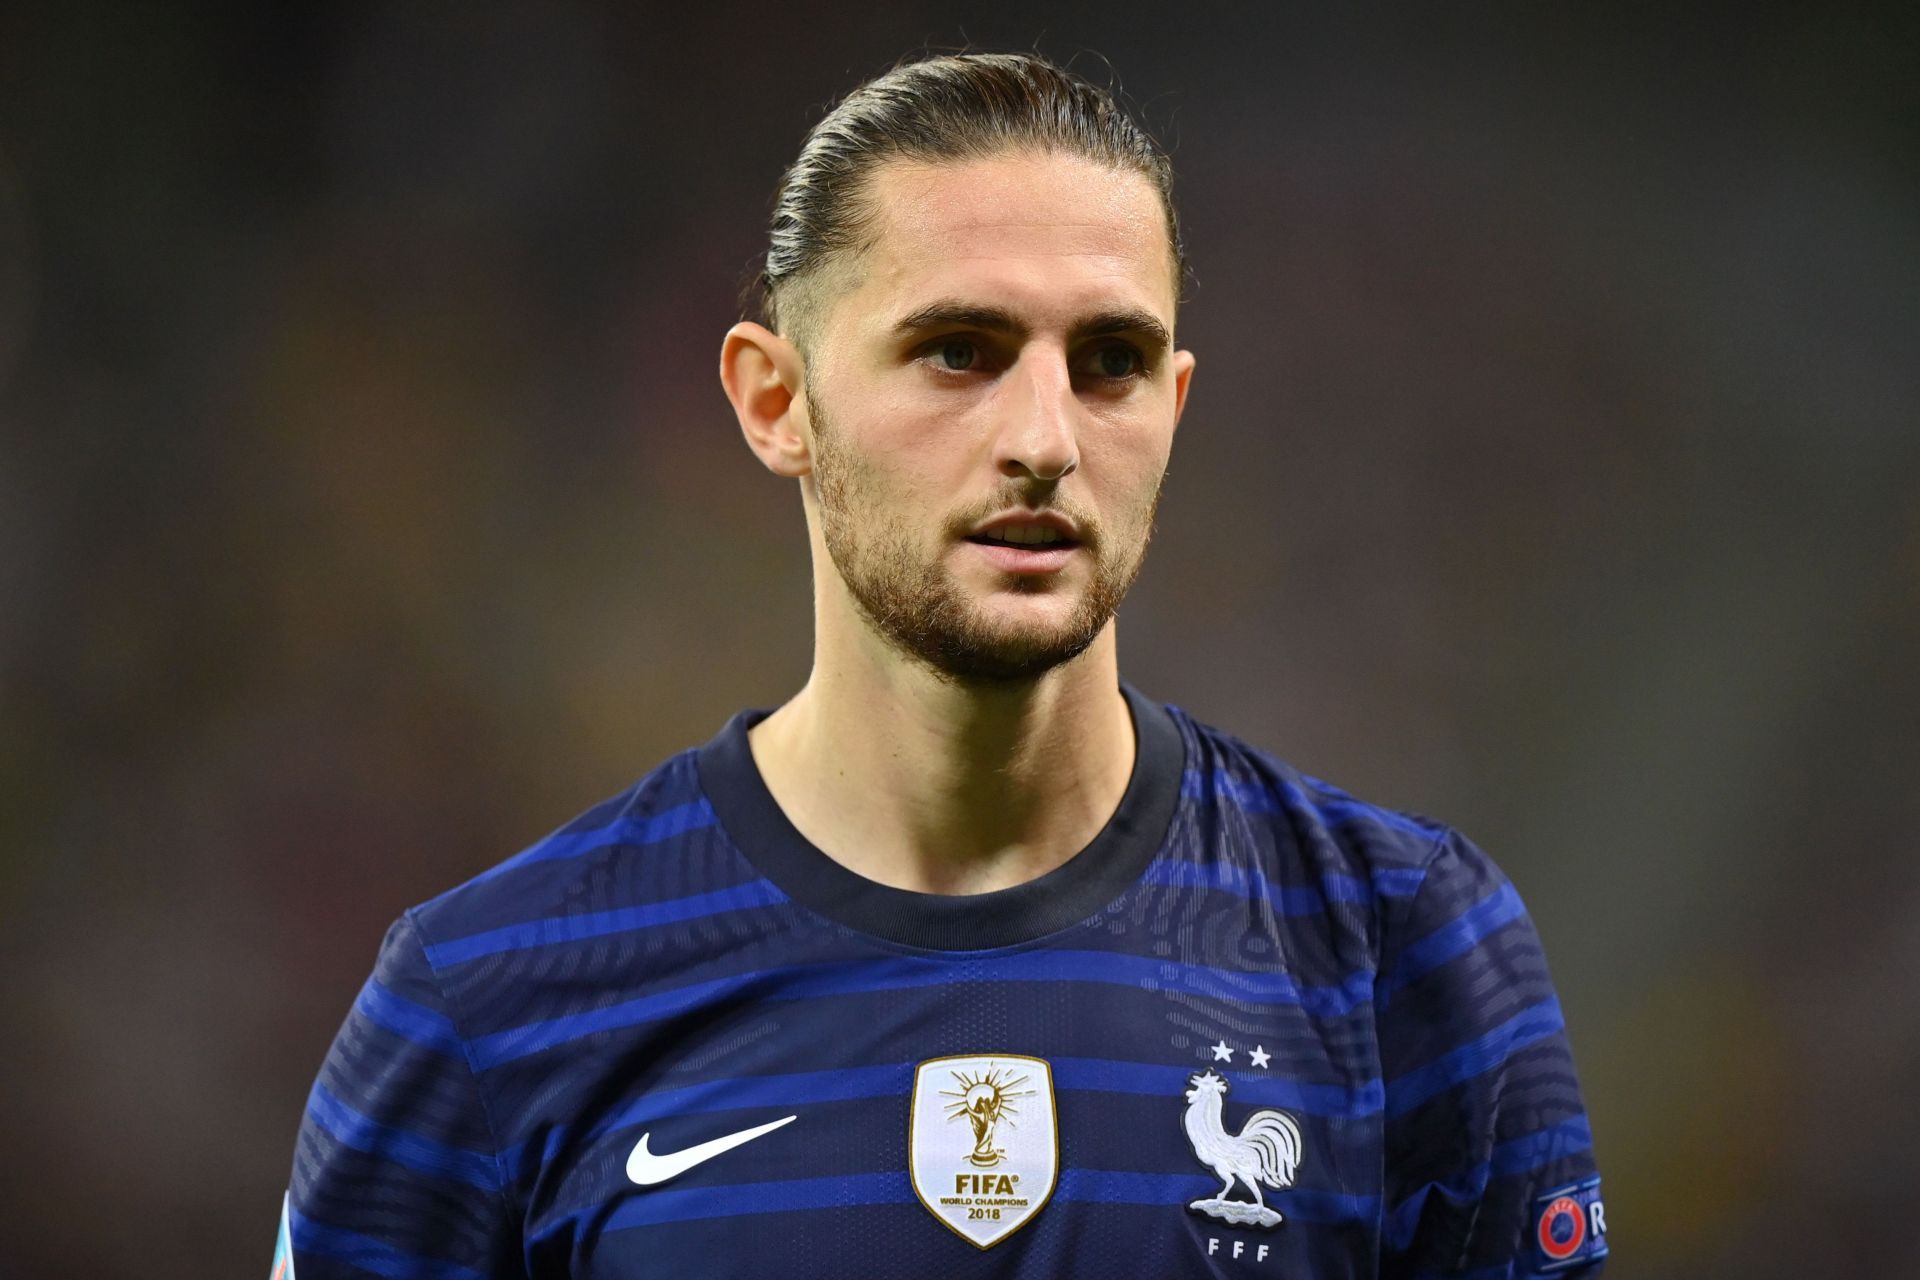 Arsenal are plotting a move for Adrien Rabiot in January.